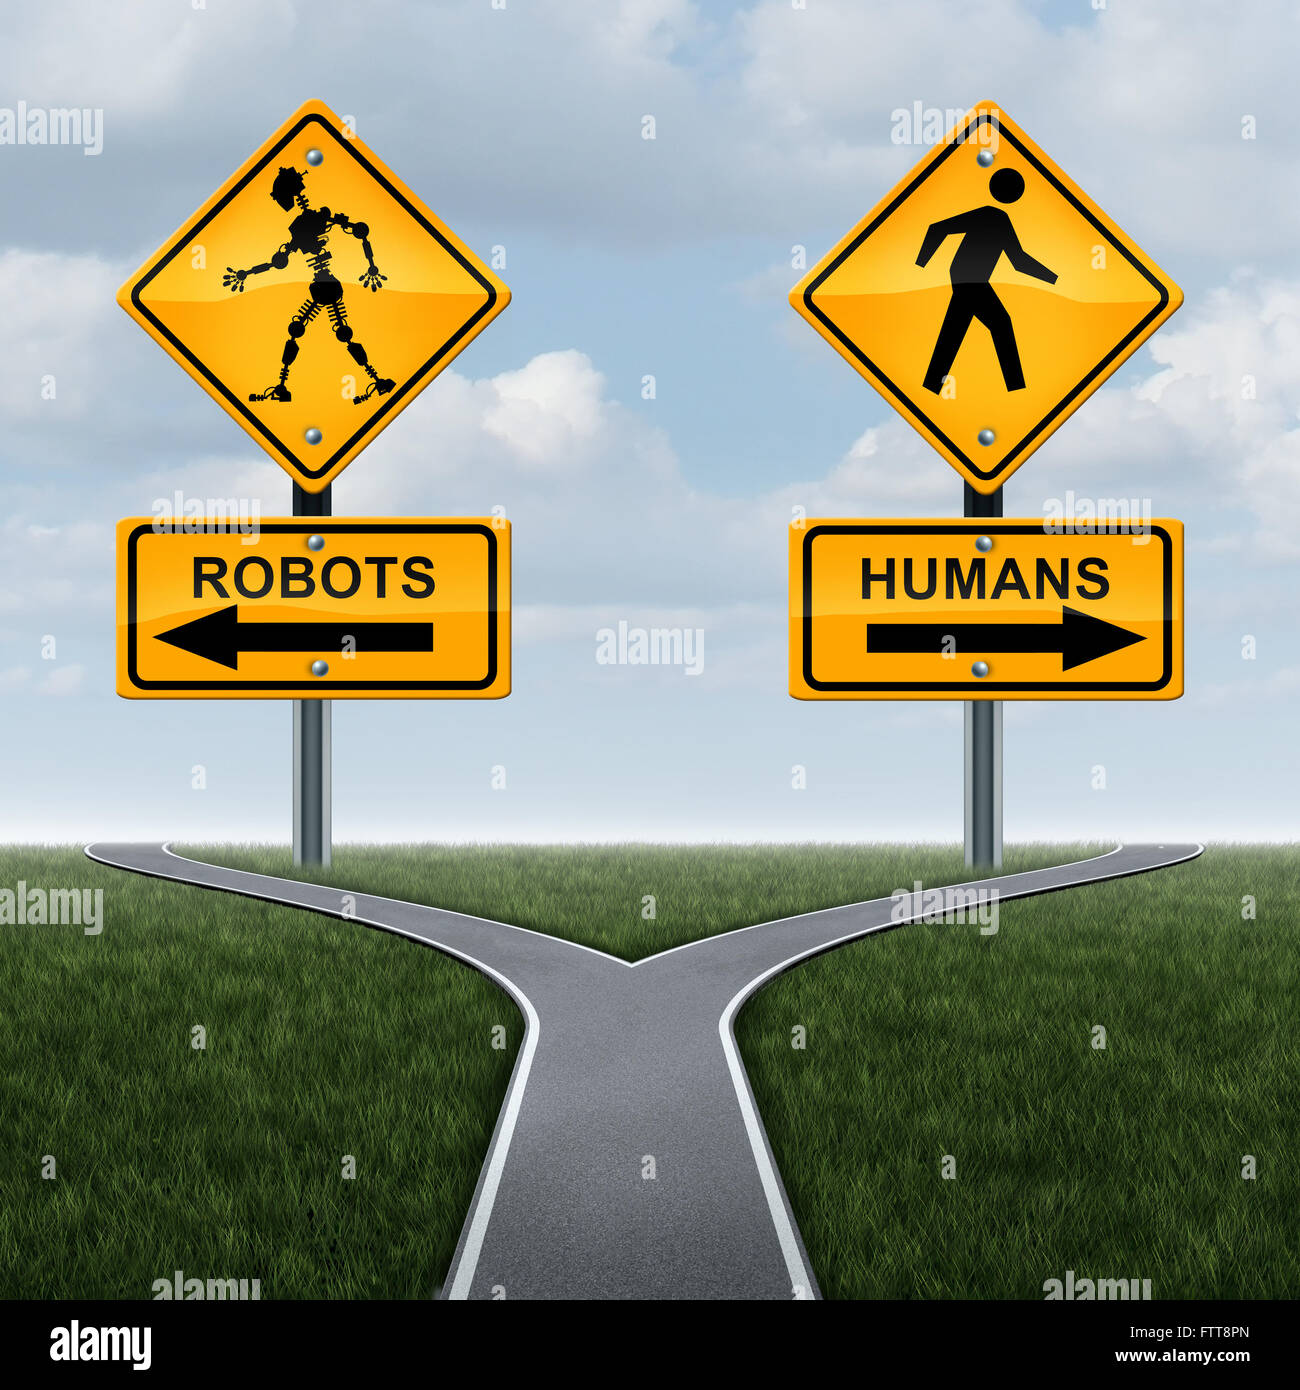 Robots and society concept or dilemma with robotic technology effects on social lifestyle as a 3D traffic sign with a futuristic humanoid cyborg icon as a symbol of artificial intelligence or self driving car engineering. Stock Photo